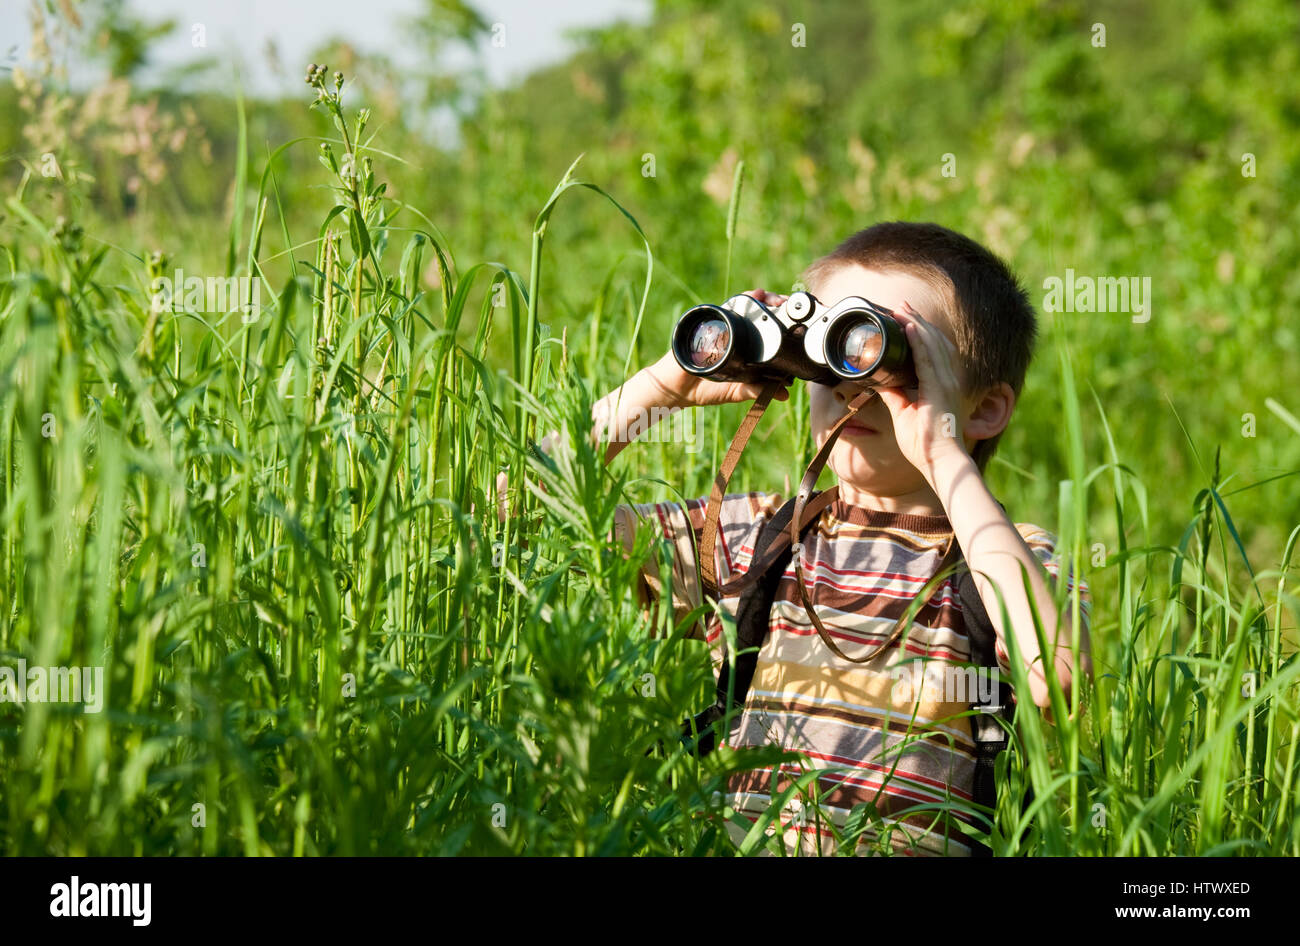 Young boy in a field looking through binoculars Stock Photo